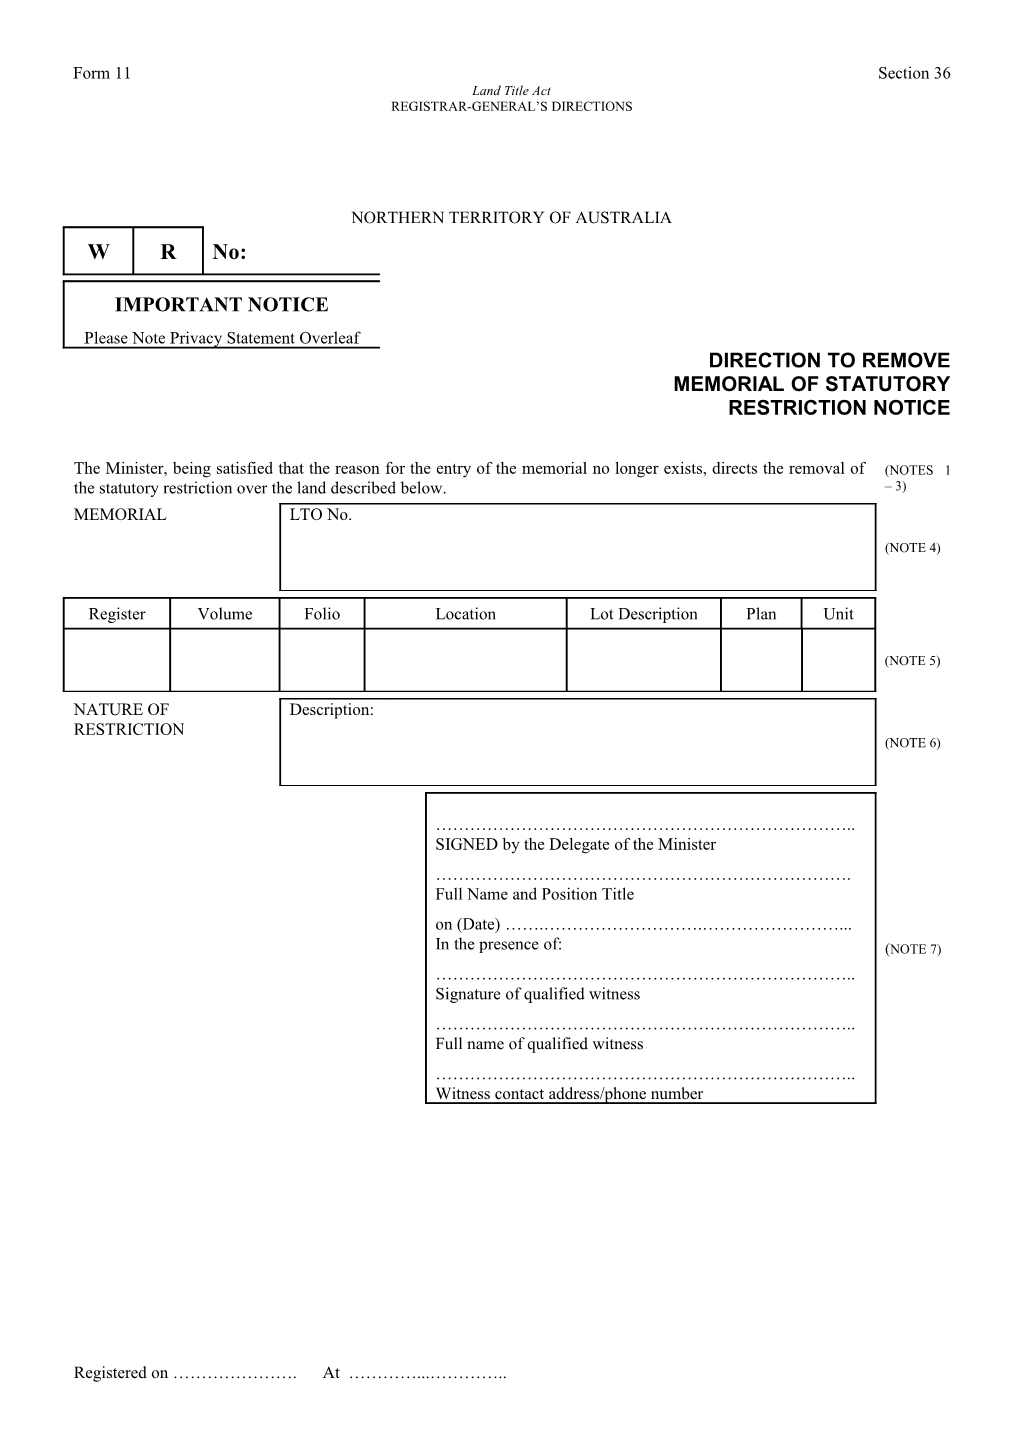 Form No. 11 - Direction to Remove Memorial of Statutory Restriction Notice